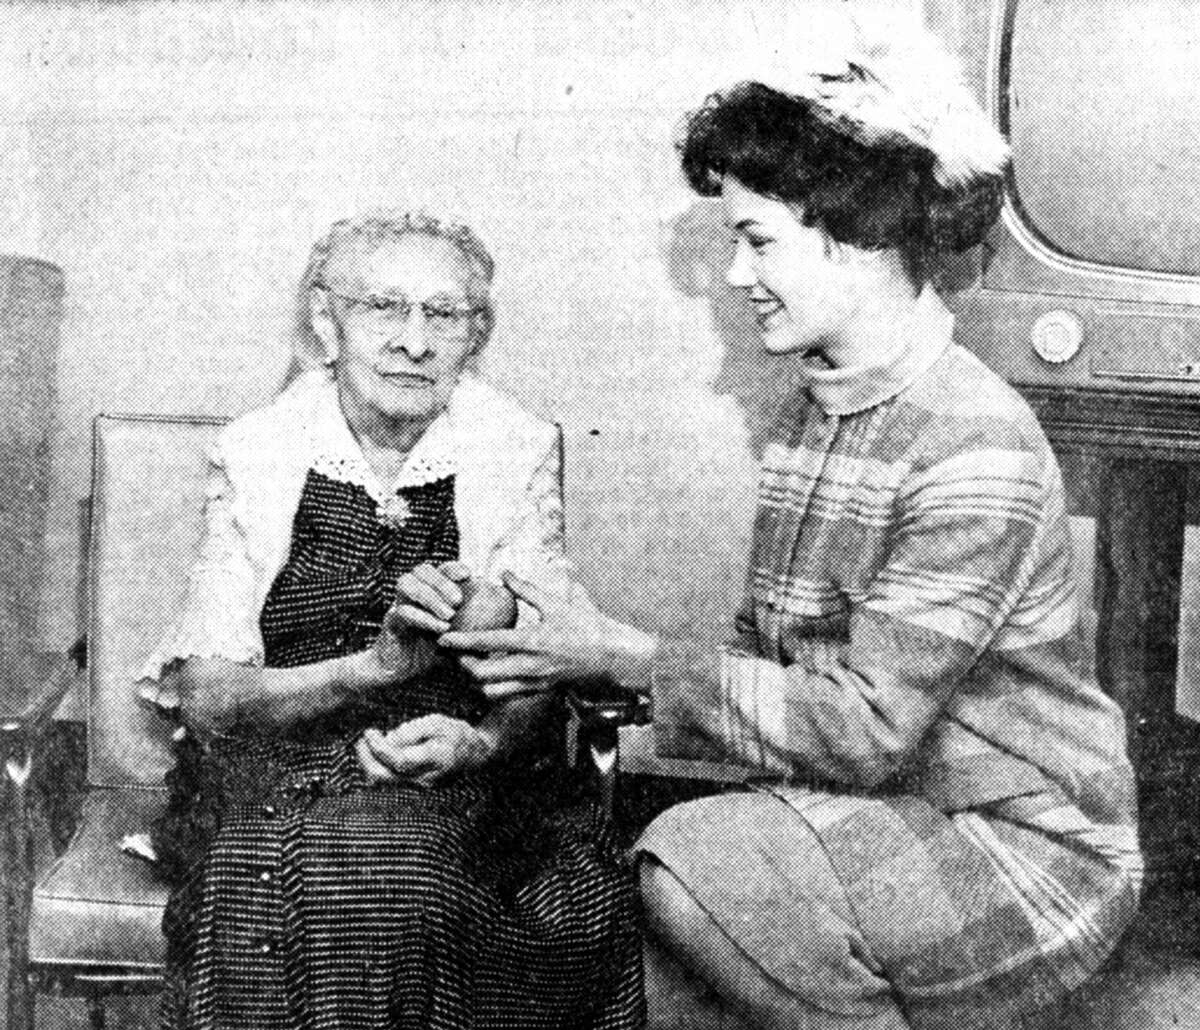 Although the Saturday morning arrival of Nancy Fleming, Miss America 1961 was delayed somewhat, she was able to fill the schedule of activities arranged by the sponsoring board of commerce. The first was to the Manistee County Medical Care Facility where she greeted a number of the patients. Fleming could be seen here giving an apple and smile to Mary Bosschem. The photo was published in the News Advocate on Feb. 12, 1962.